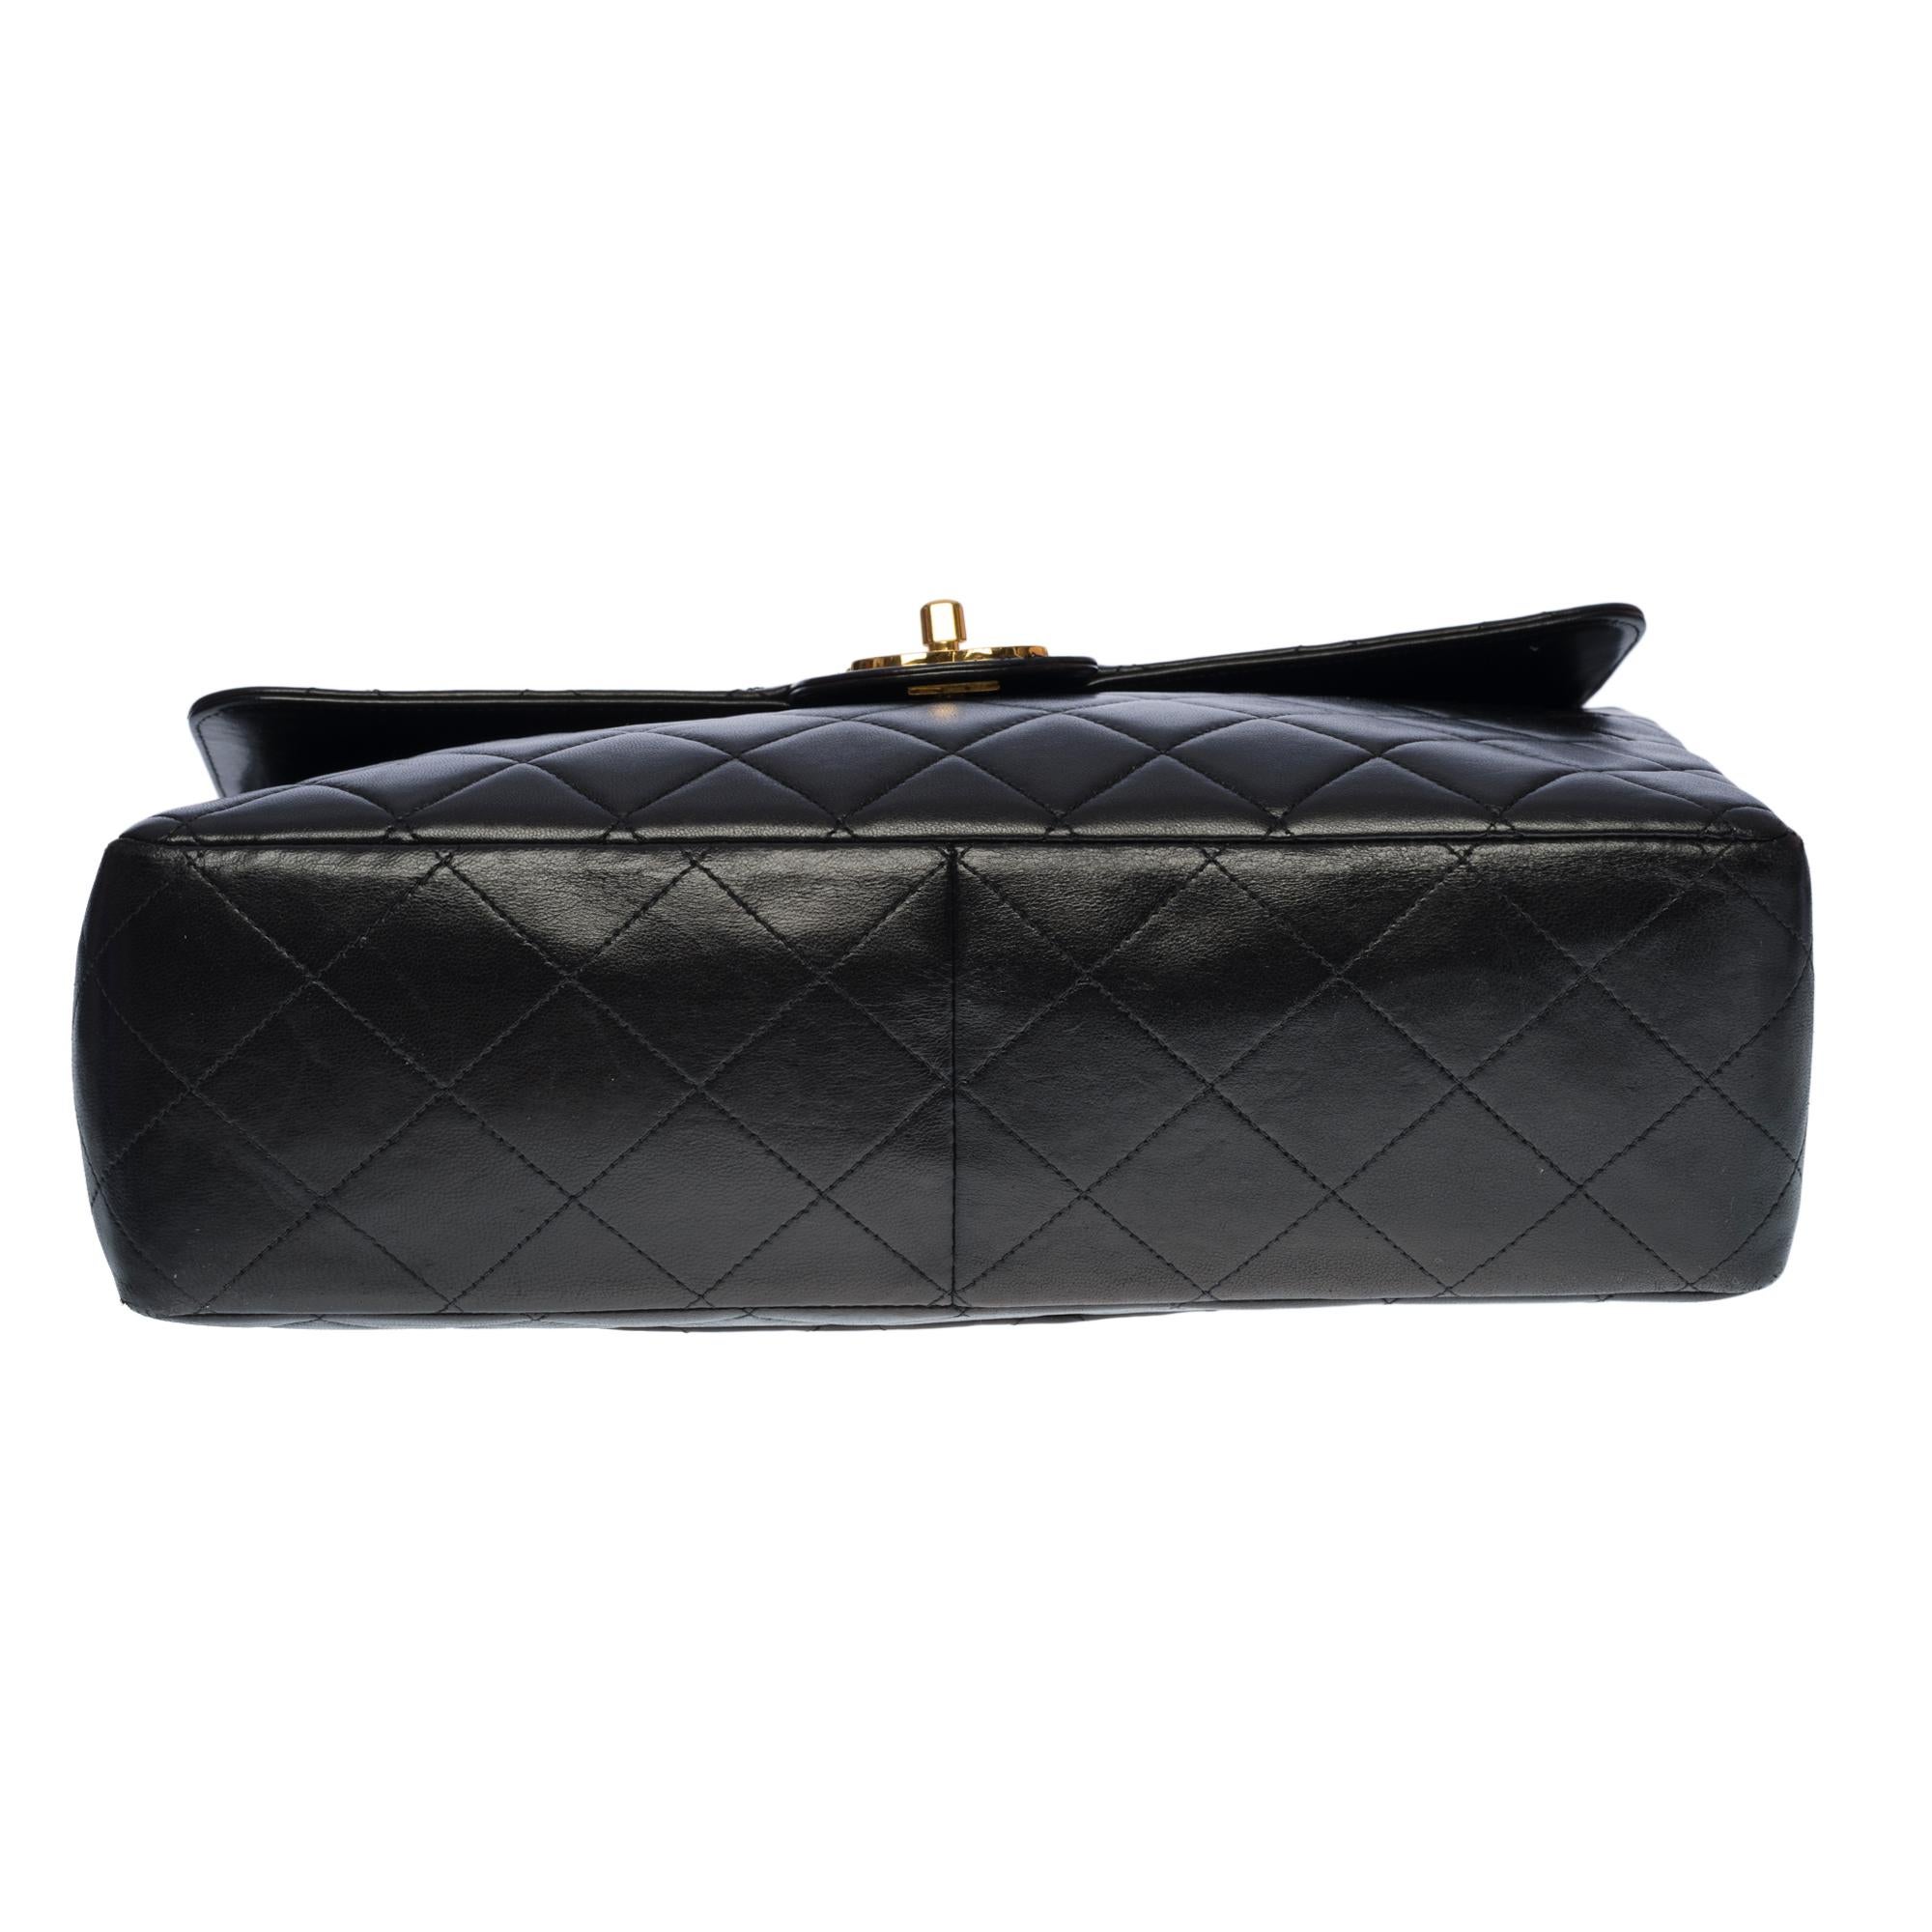 Chanel Timeless Jumbo single flap shoulder bag in black quilted lambskin, GHW For Sale 2